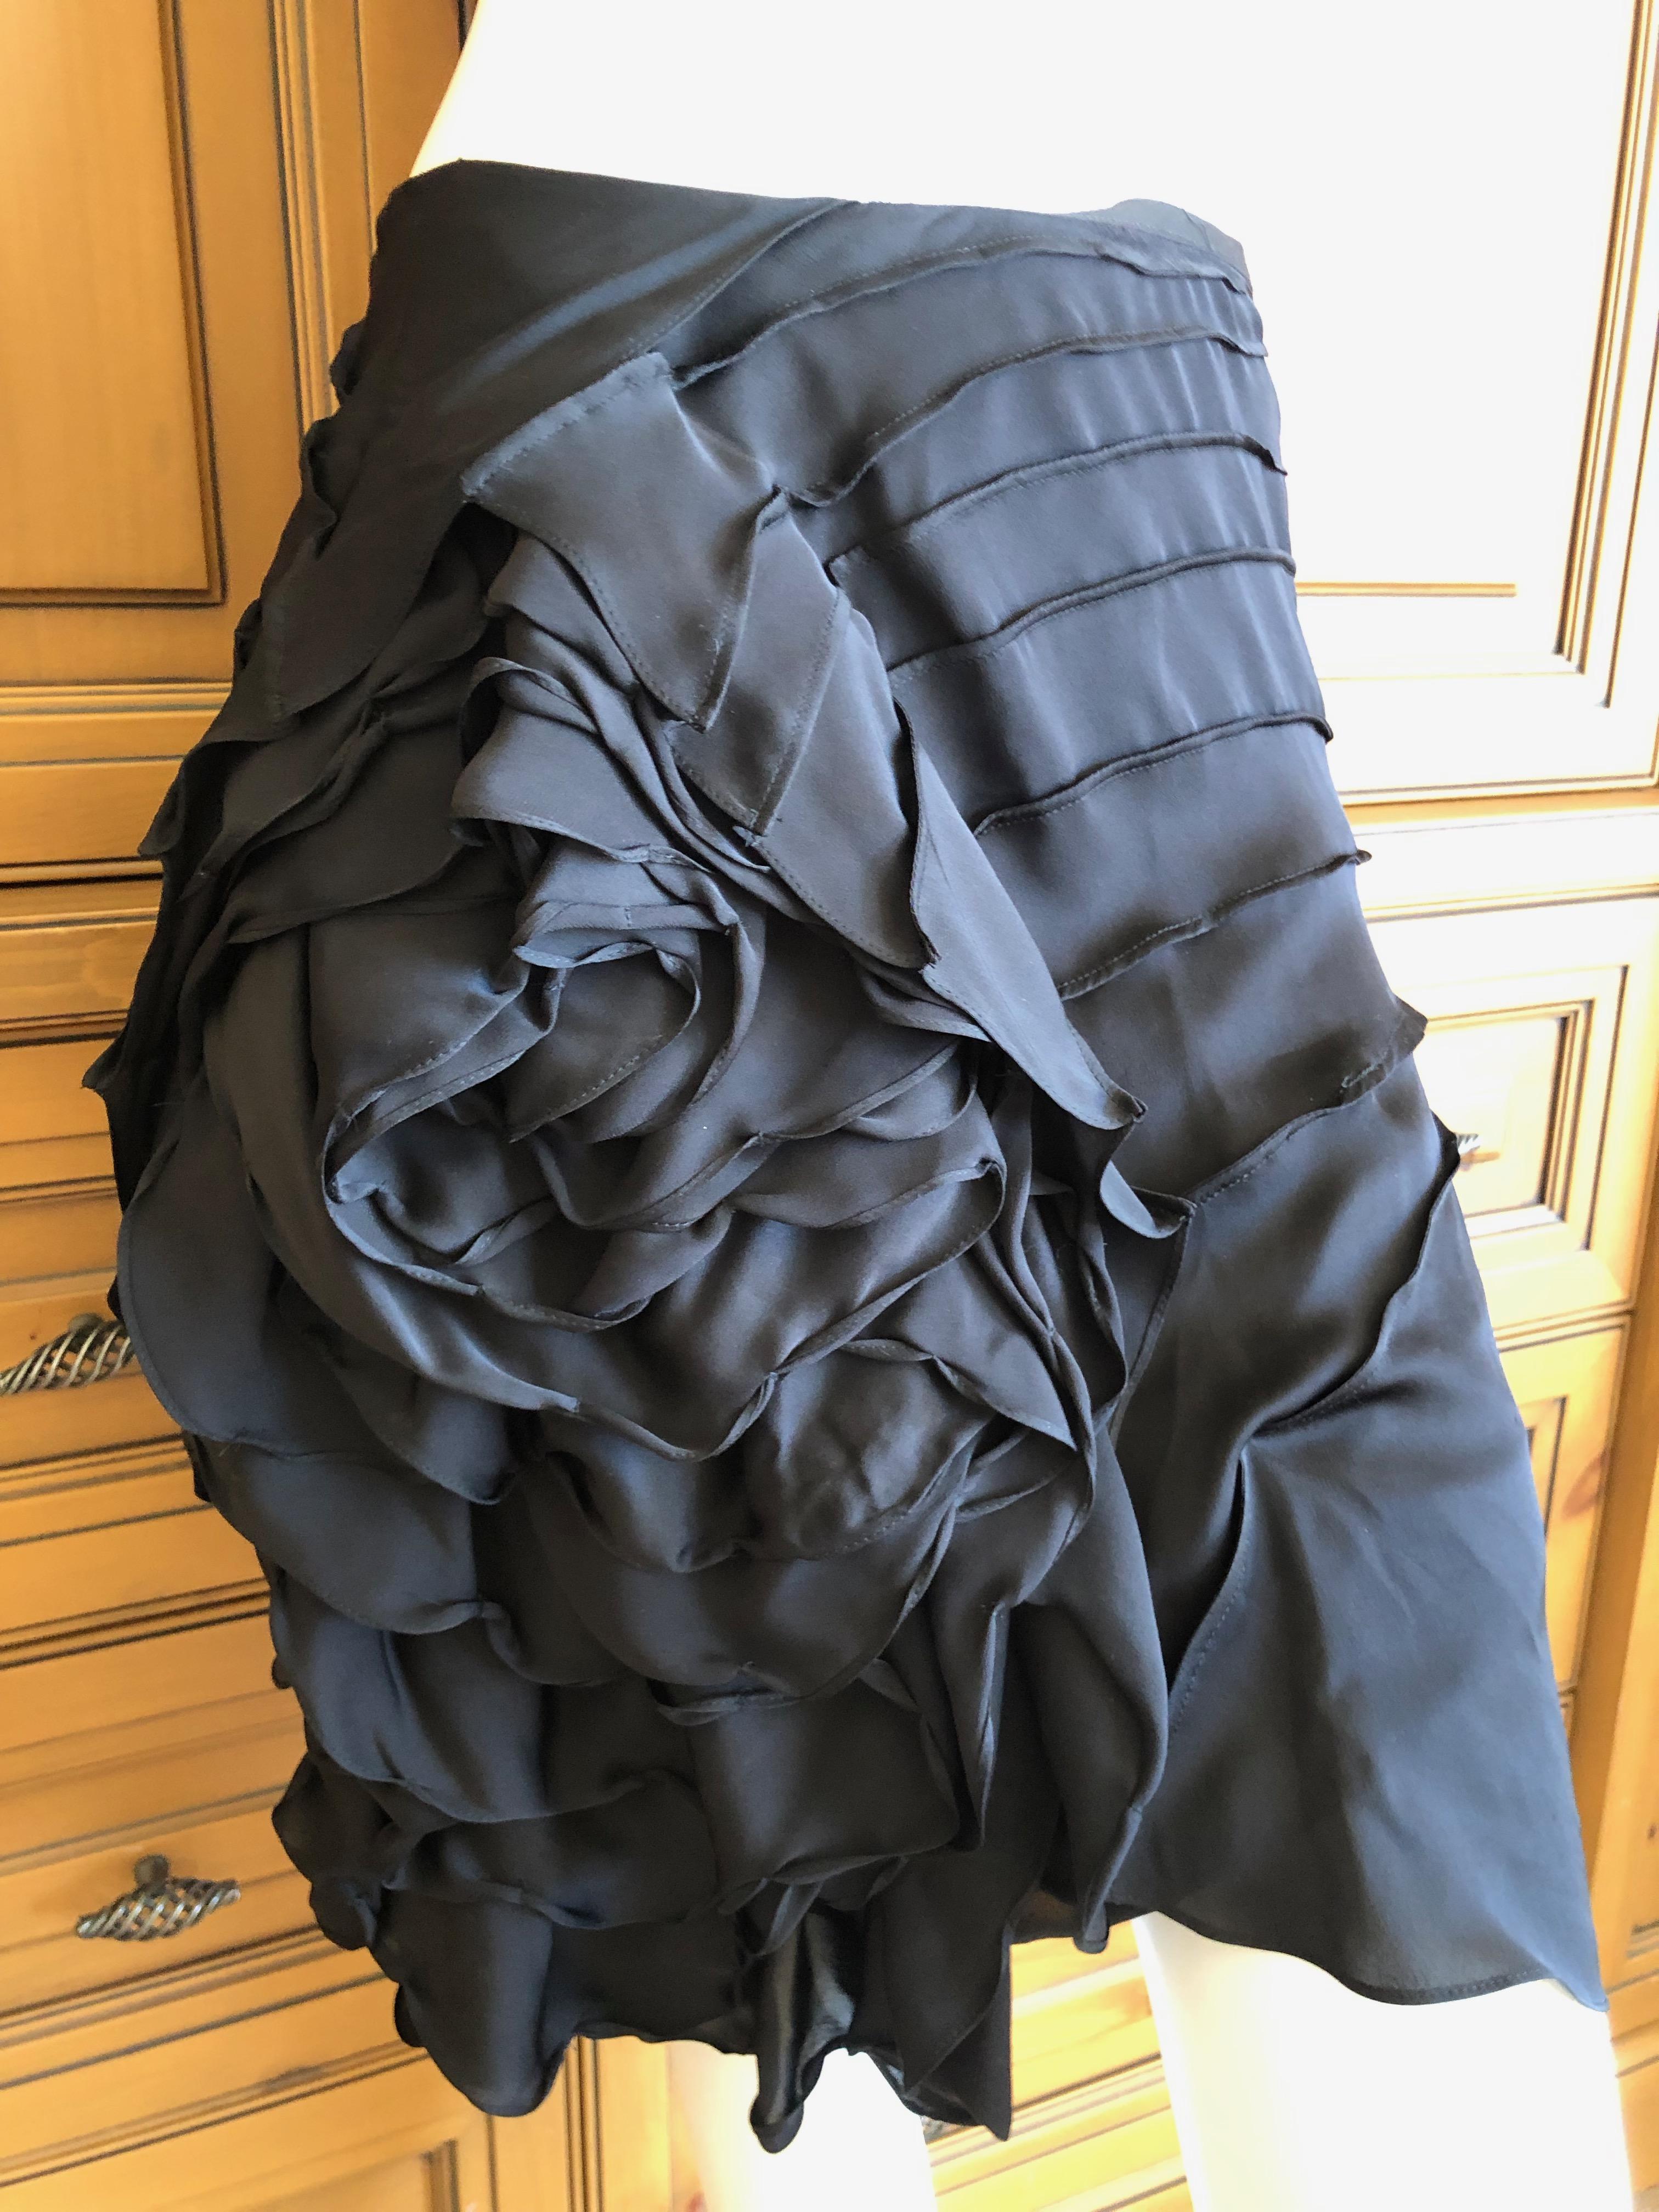 Yves Saint Laurent by Tom Ford Black 3D Rose Blossom Skirt Spring 2003 In Excellent Condition For Sale In Cloverdale, CA